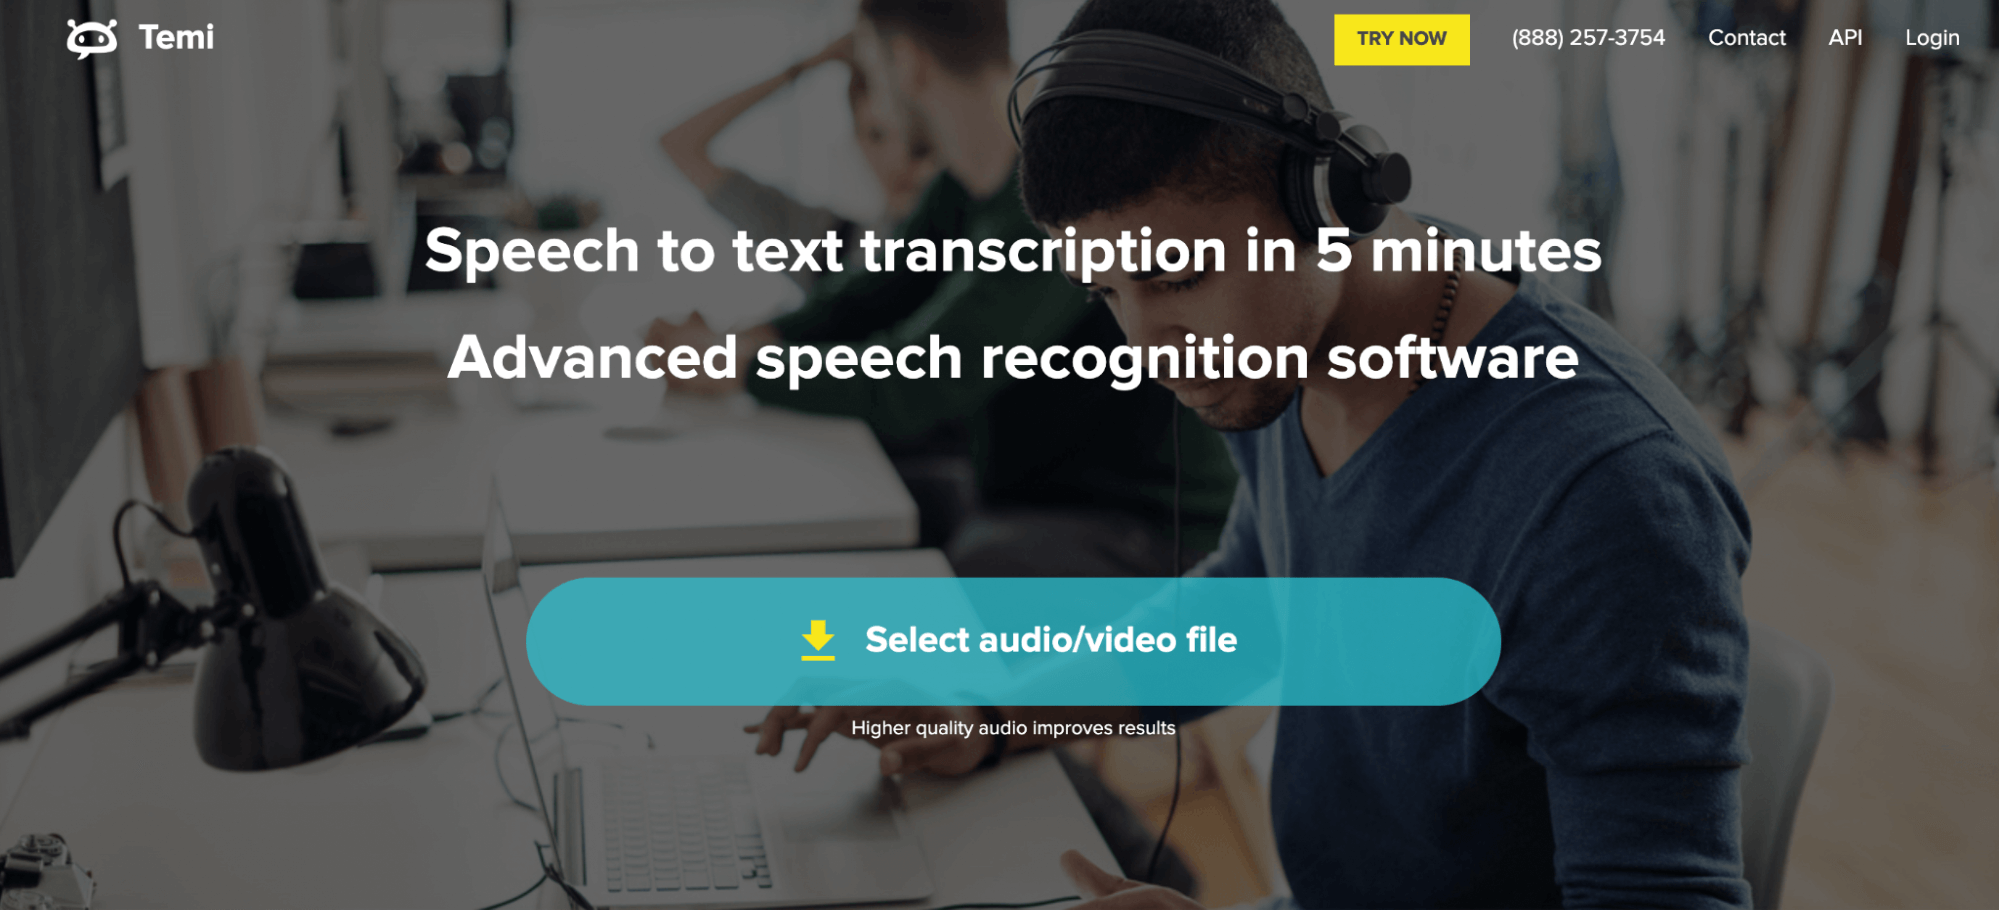 Temi best high quality transcription software solely for english